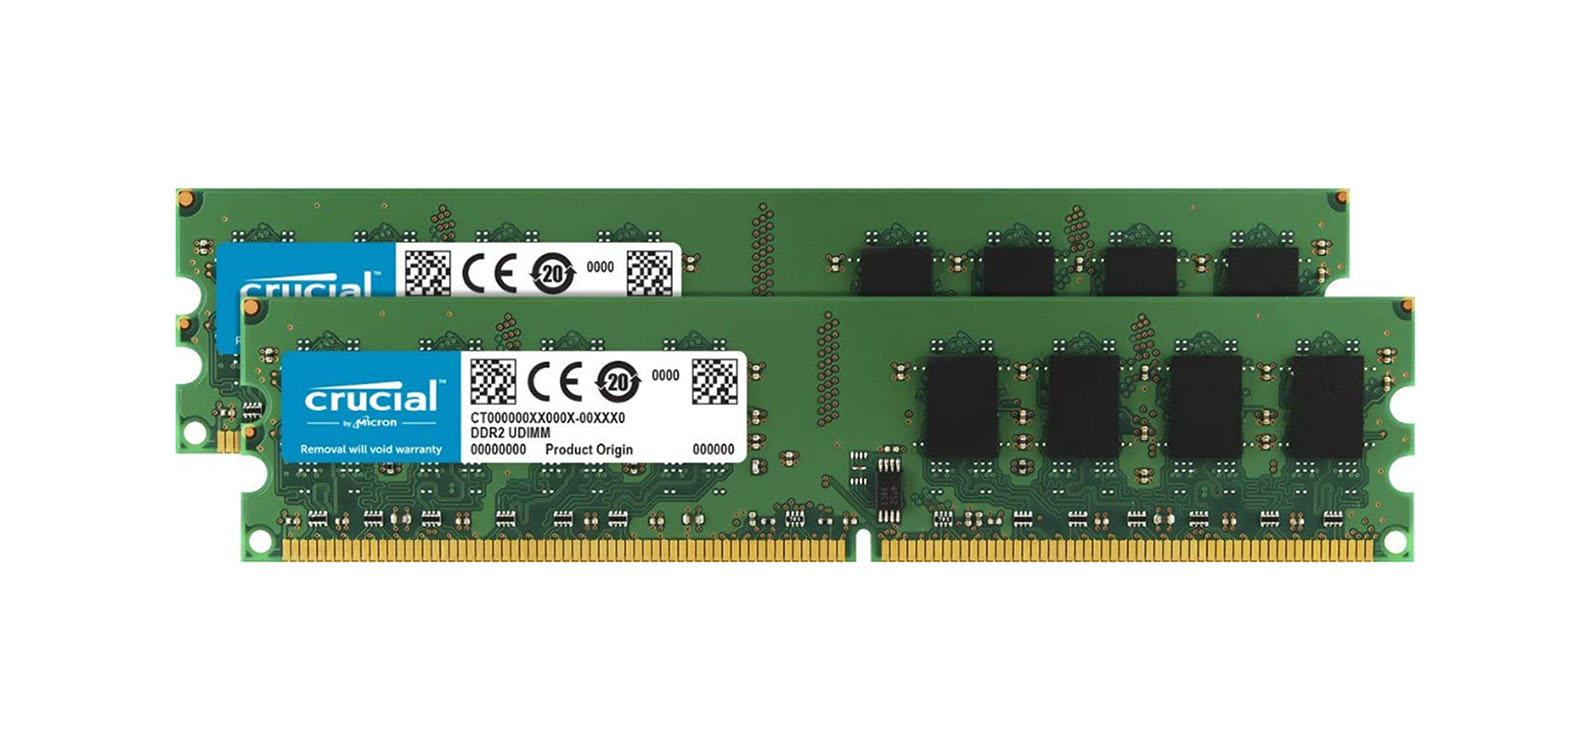 Crucial CT565749 8GB Kit (2 x 4GB) DDR2-667MHz PC2-5300 ECC Fully Buffered CL5 240-Pin DIMM Memory upgrade for Supermicro SUPER X7DAL-E